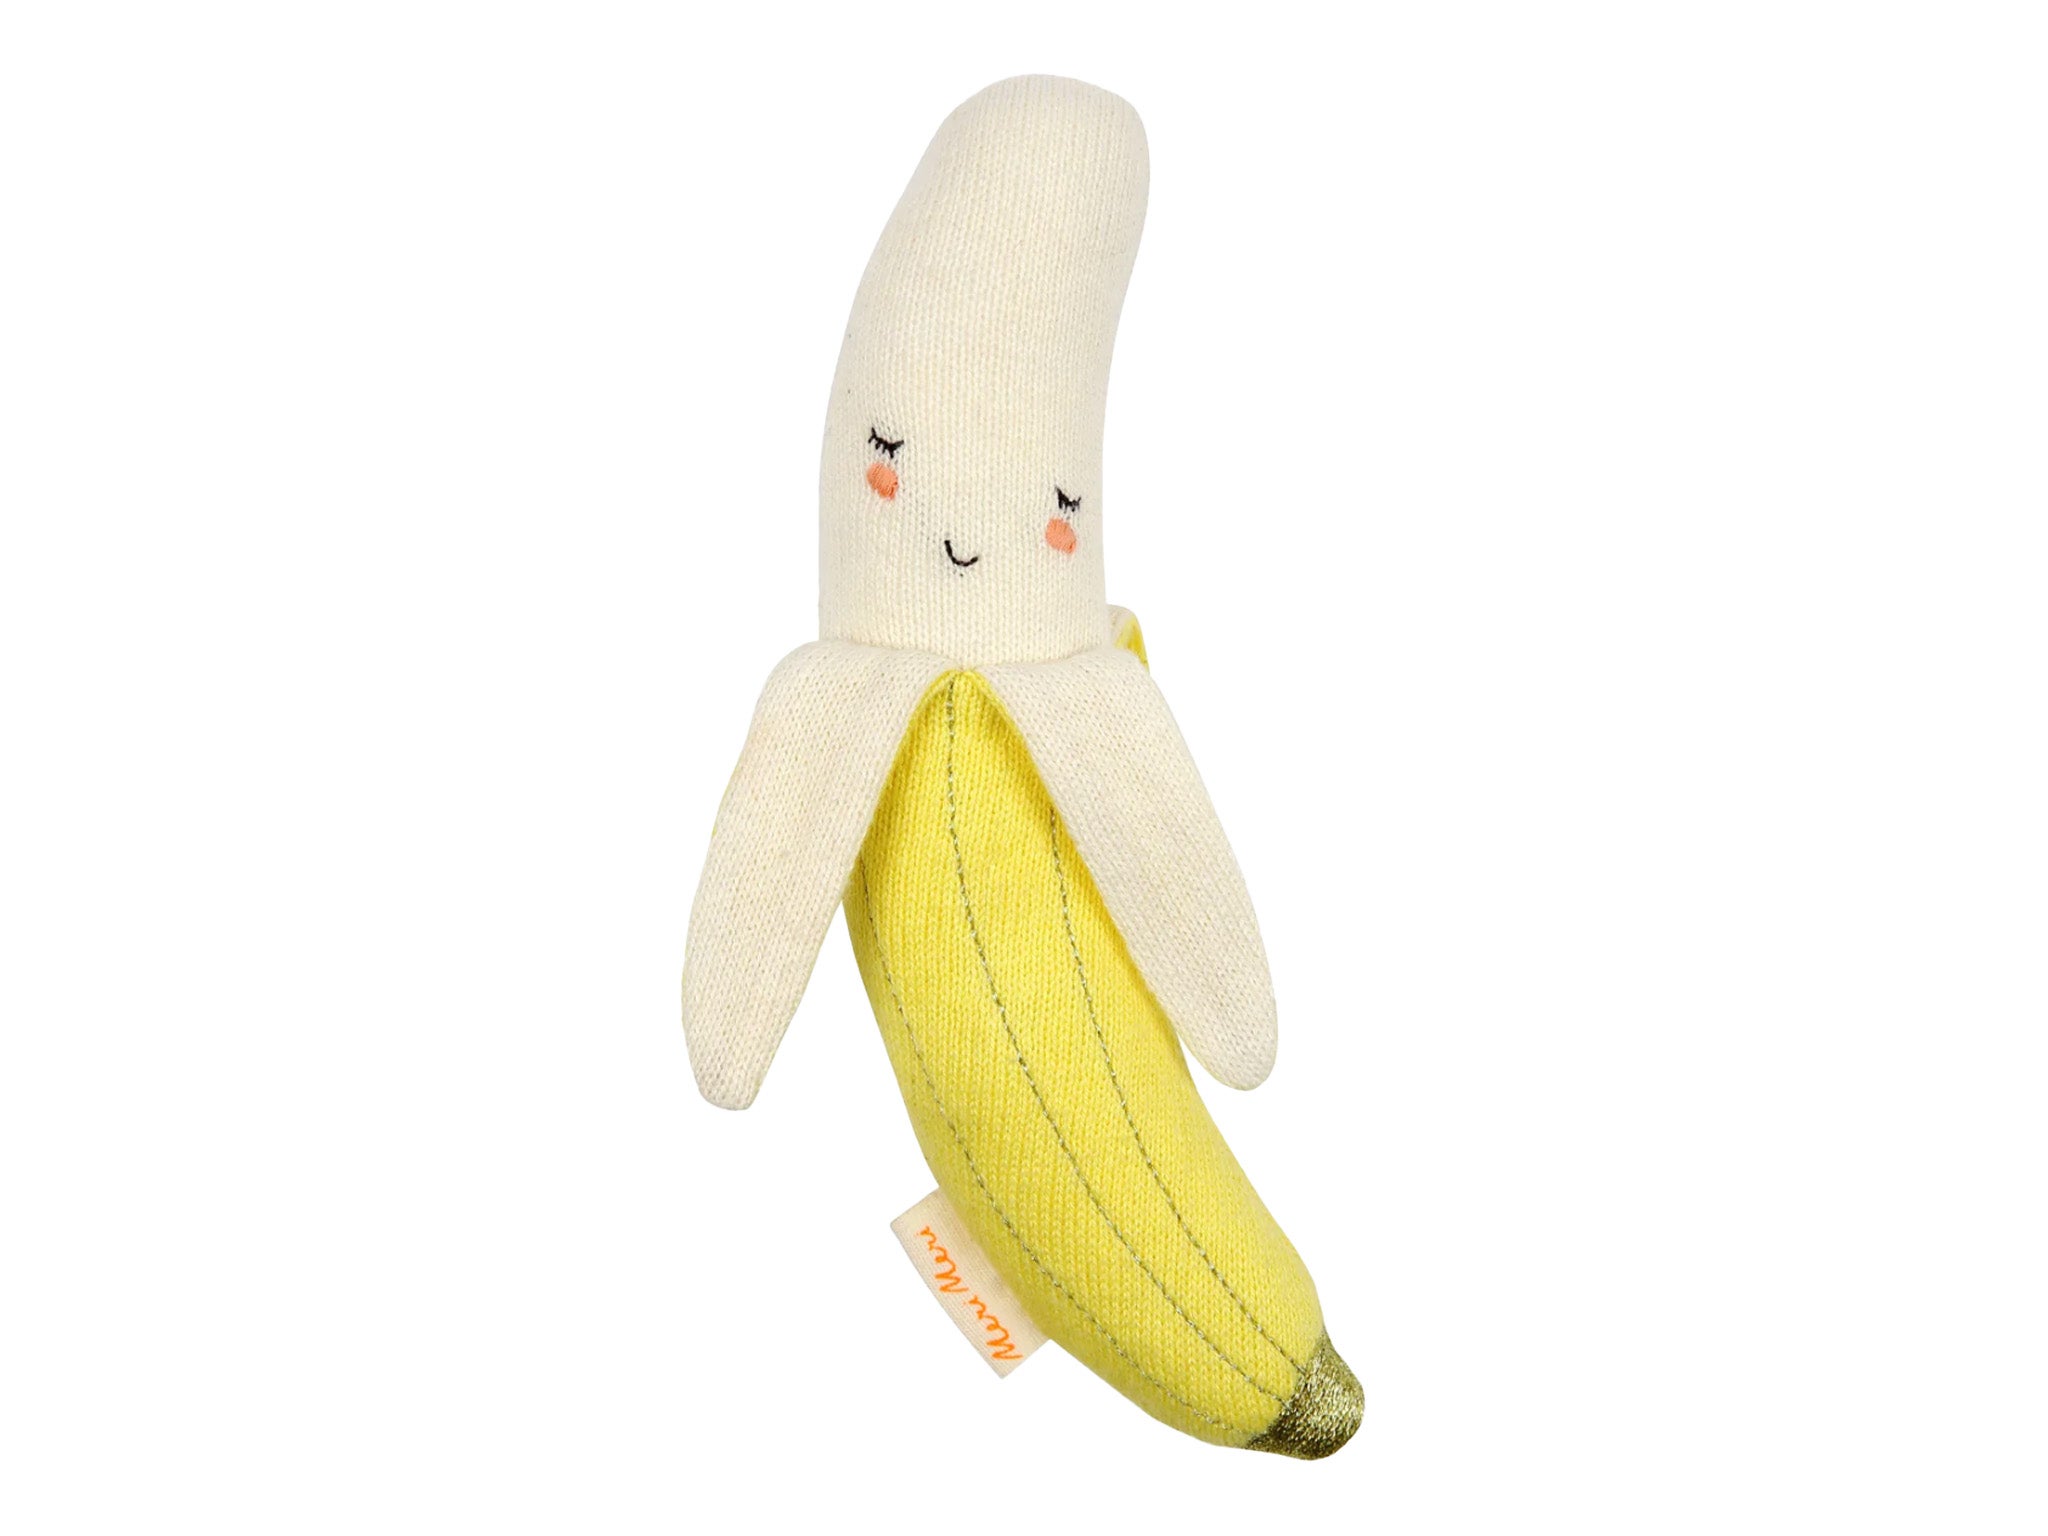 banana-Indybest-baby-gift-review